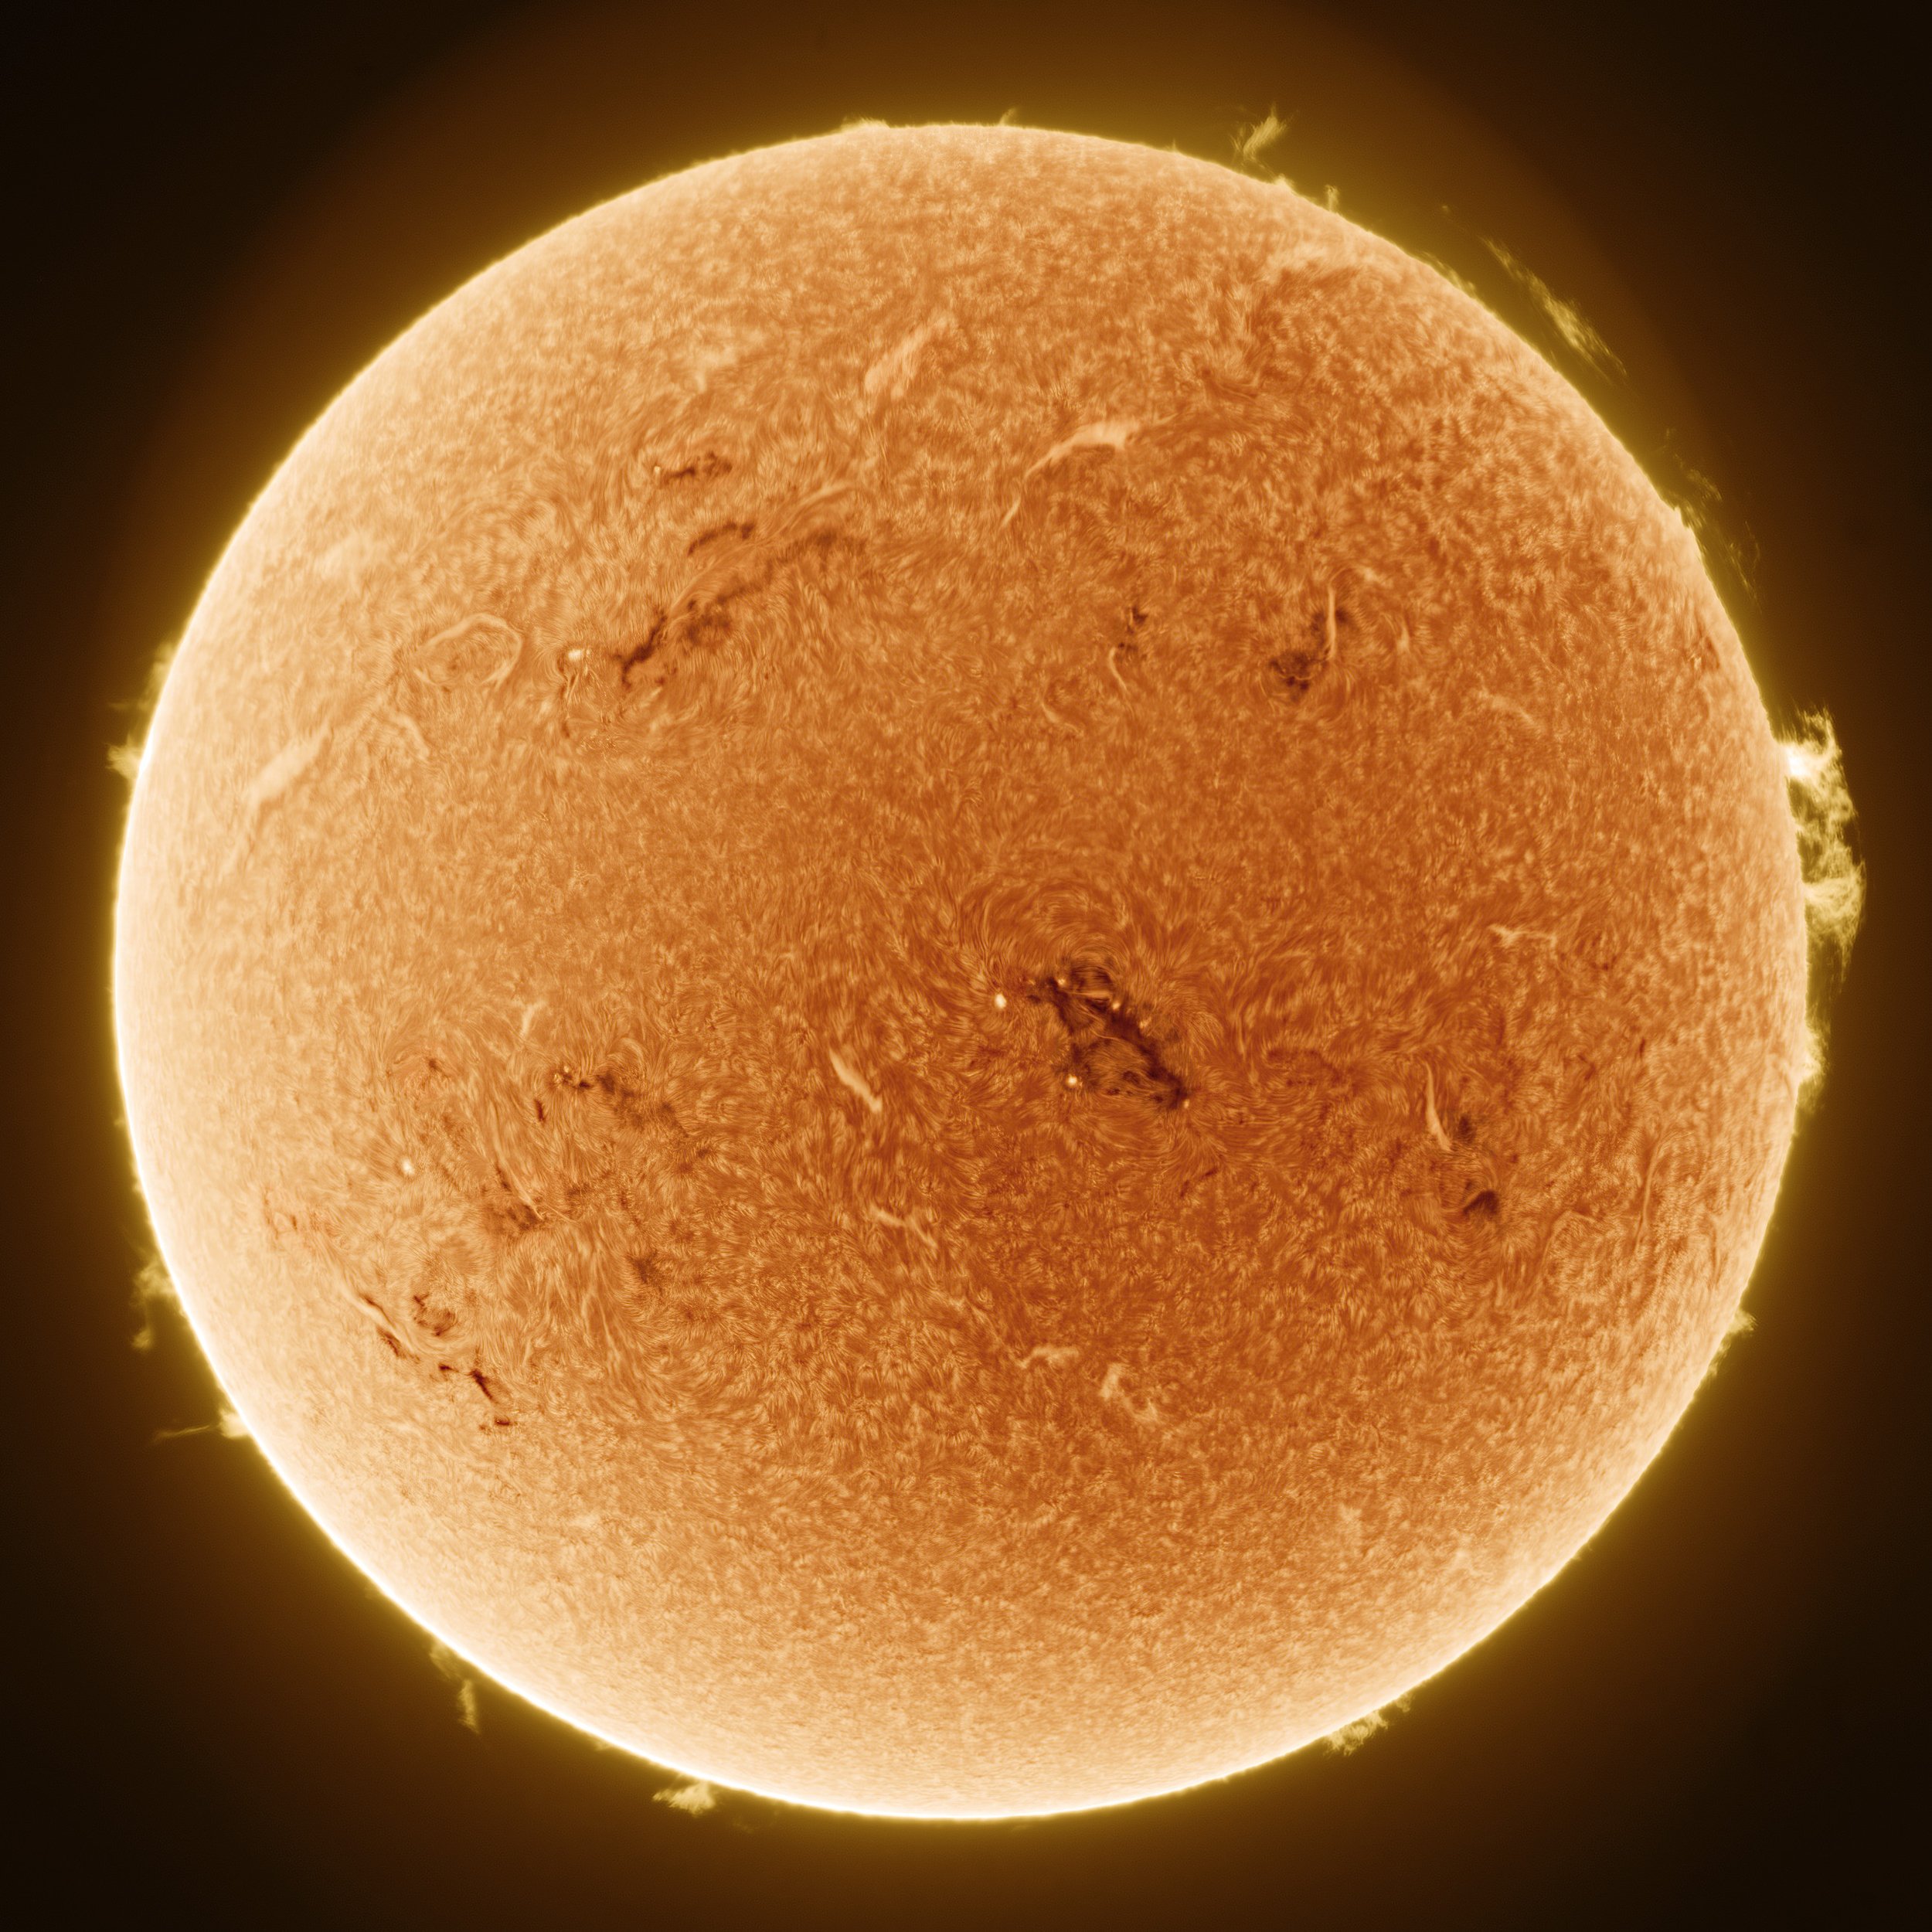  The Sun’s chromosphere in Hydrogen alpha light. This image was taken with a telescope equipped with a special filter (etalon) that only passes light from Hydrogen. These details would otherwise be lost due to the intense brightness of the underlying